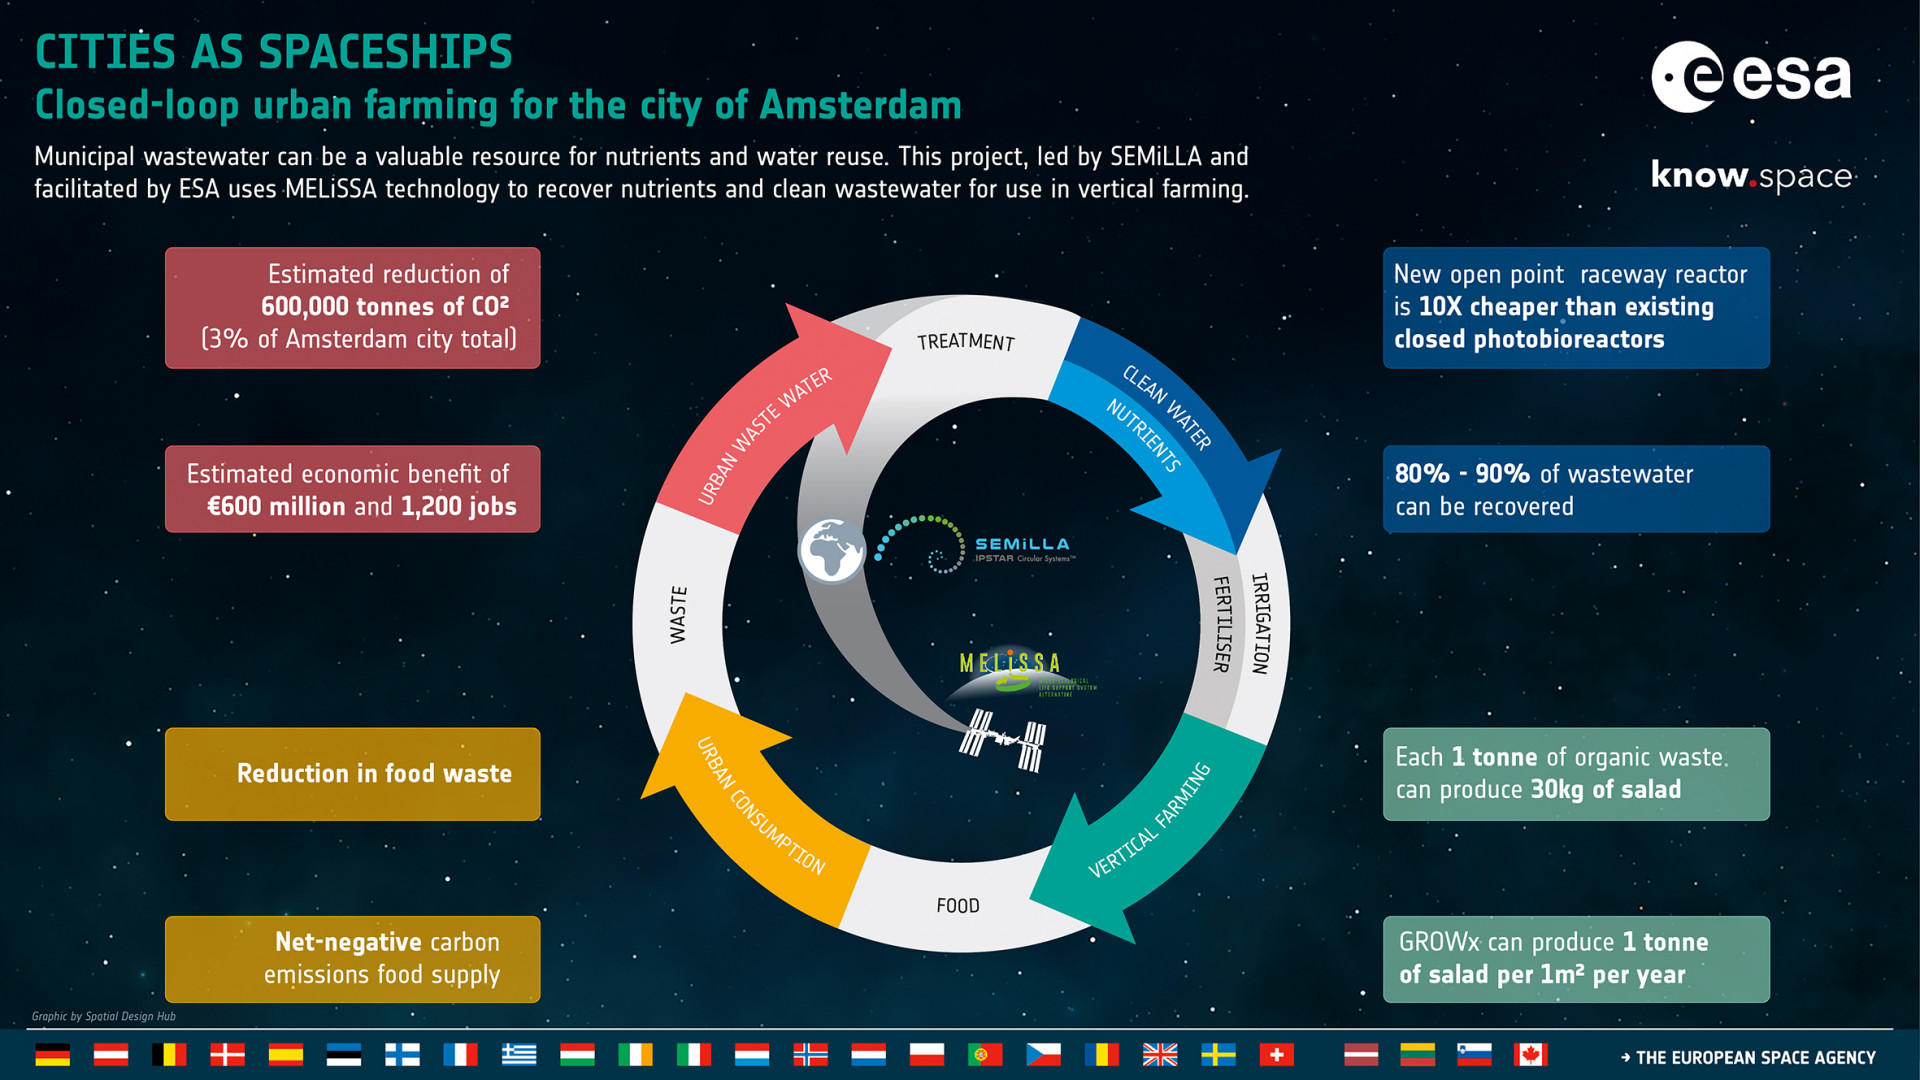 Socio-economic benefits for cities from Space technology through resource circularity